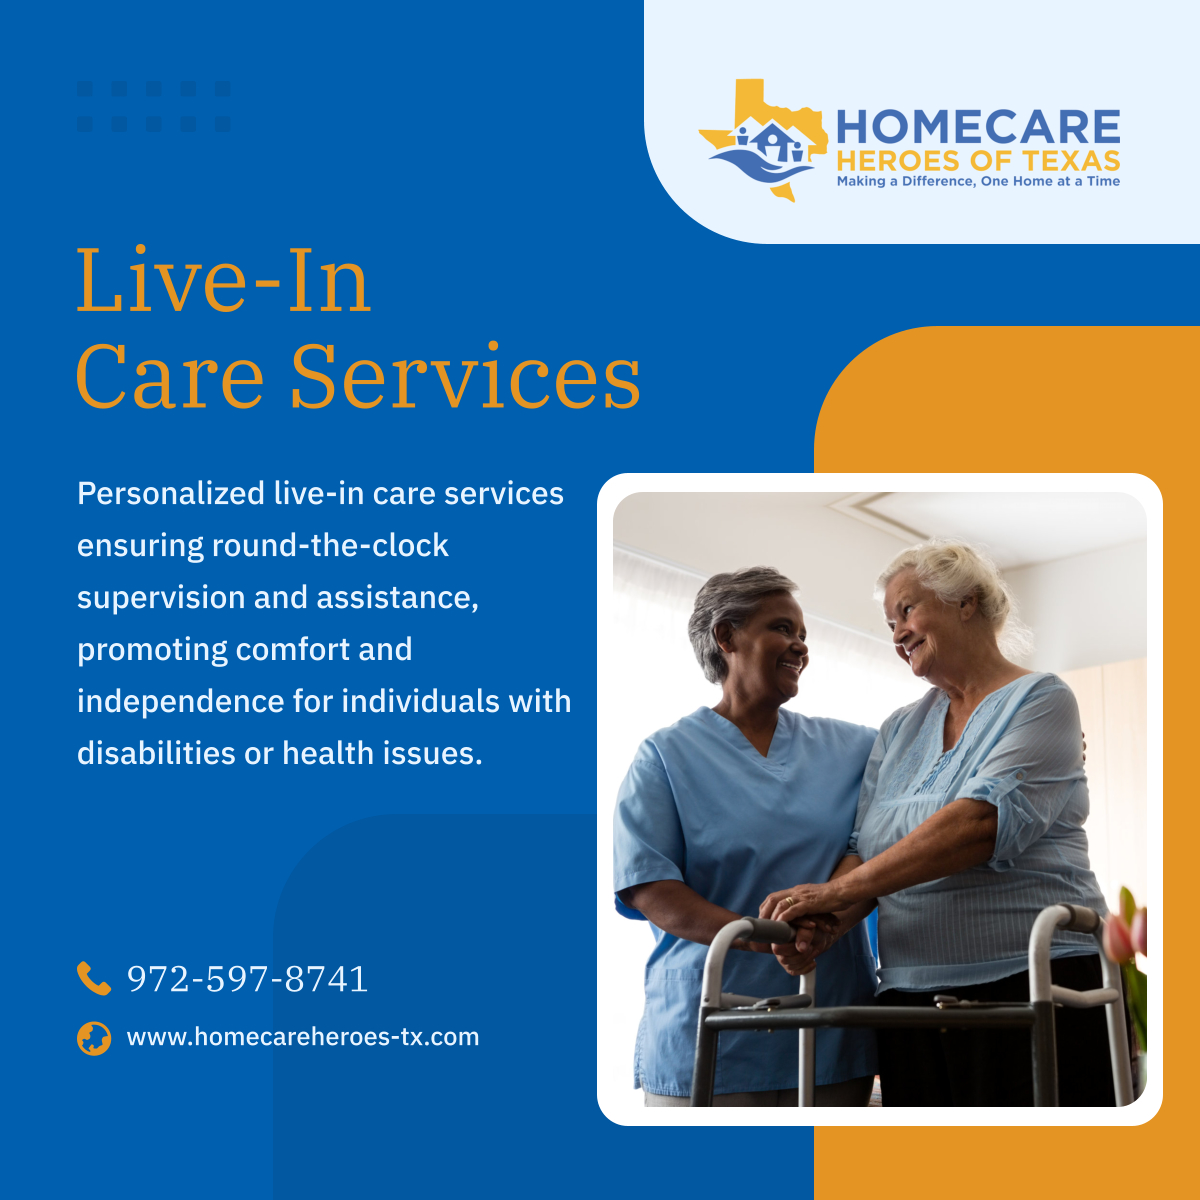 Enjoy the peace of mind of personalized live-in care services for your loved ones. Contact us today for compassionate support. 

#HomeCare #GarlandTX #LiveInCare #CareServices #PersonalizedCare